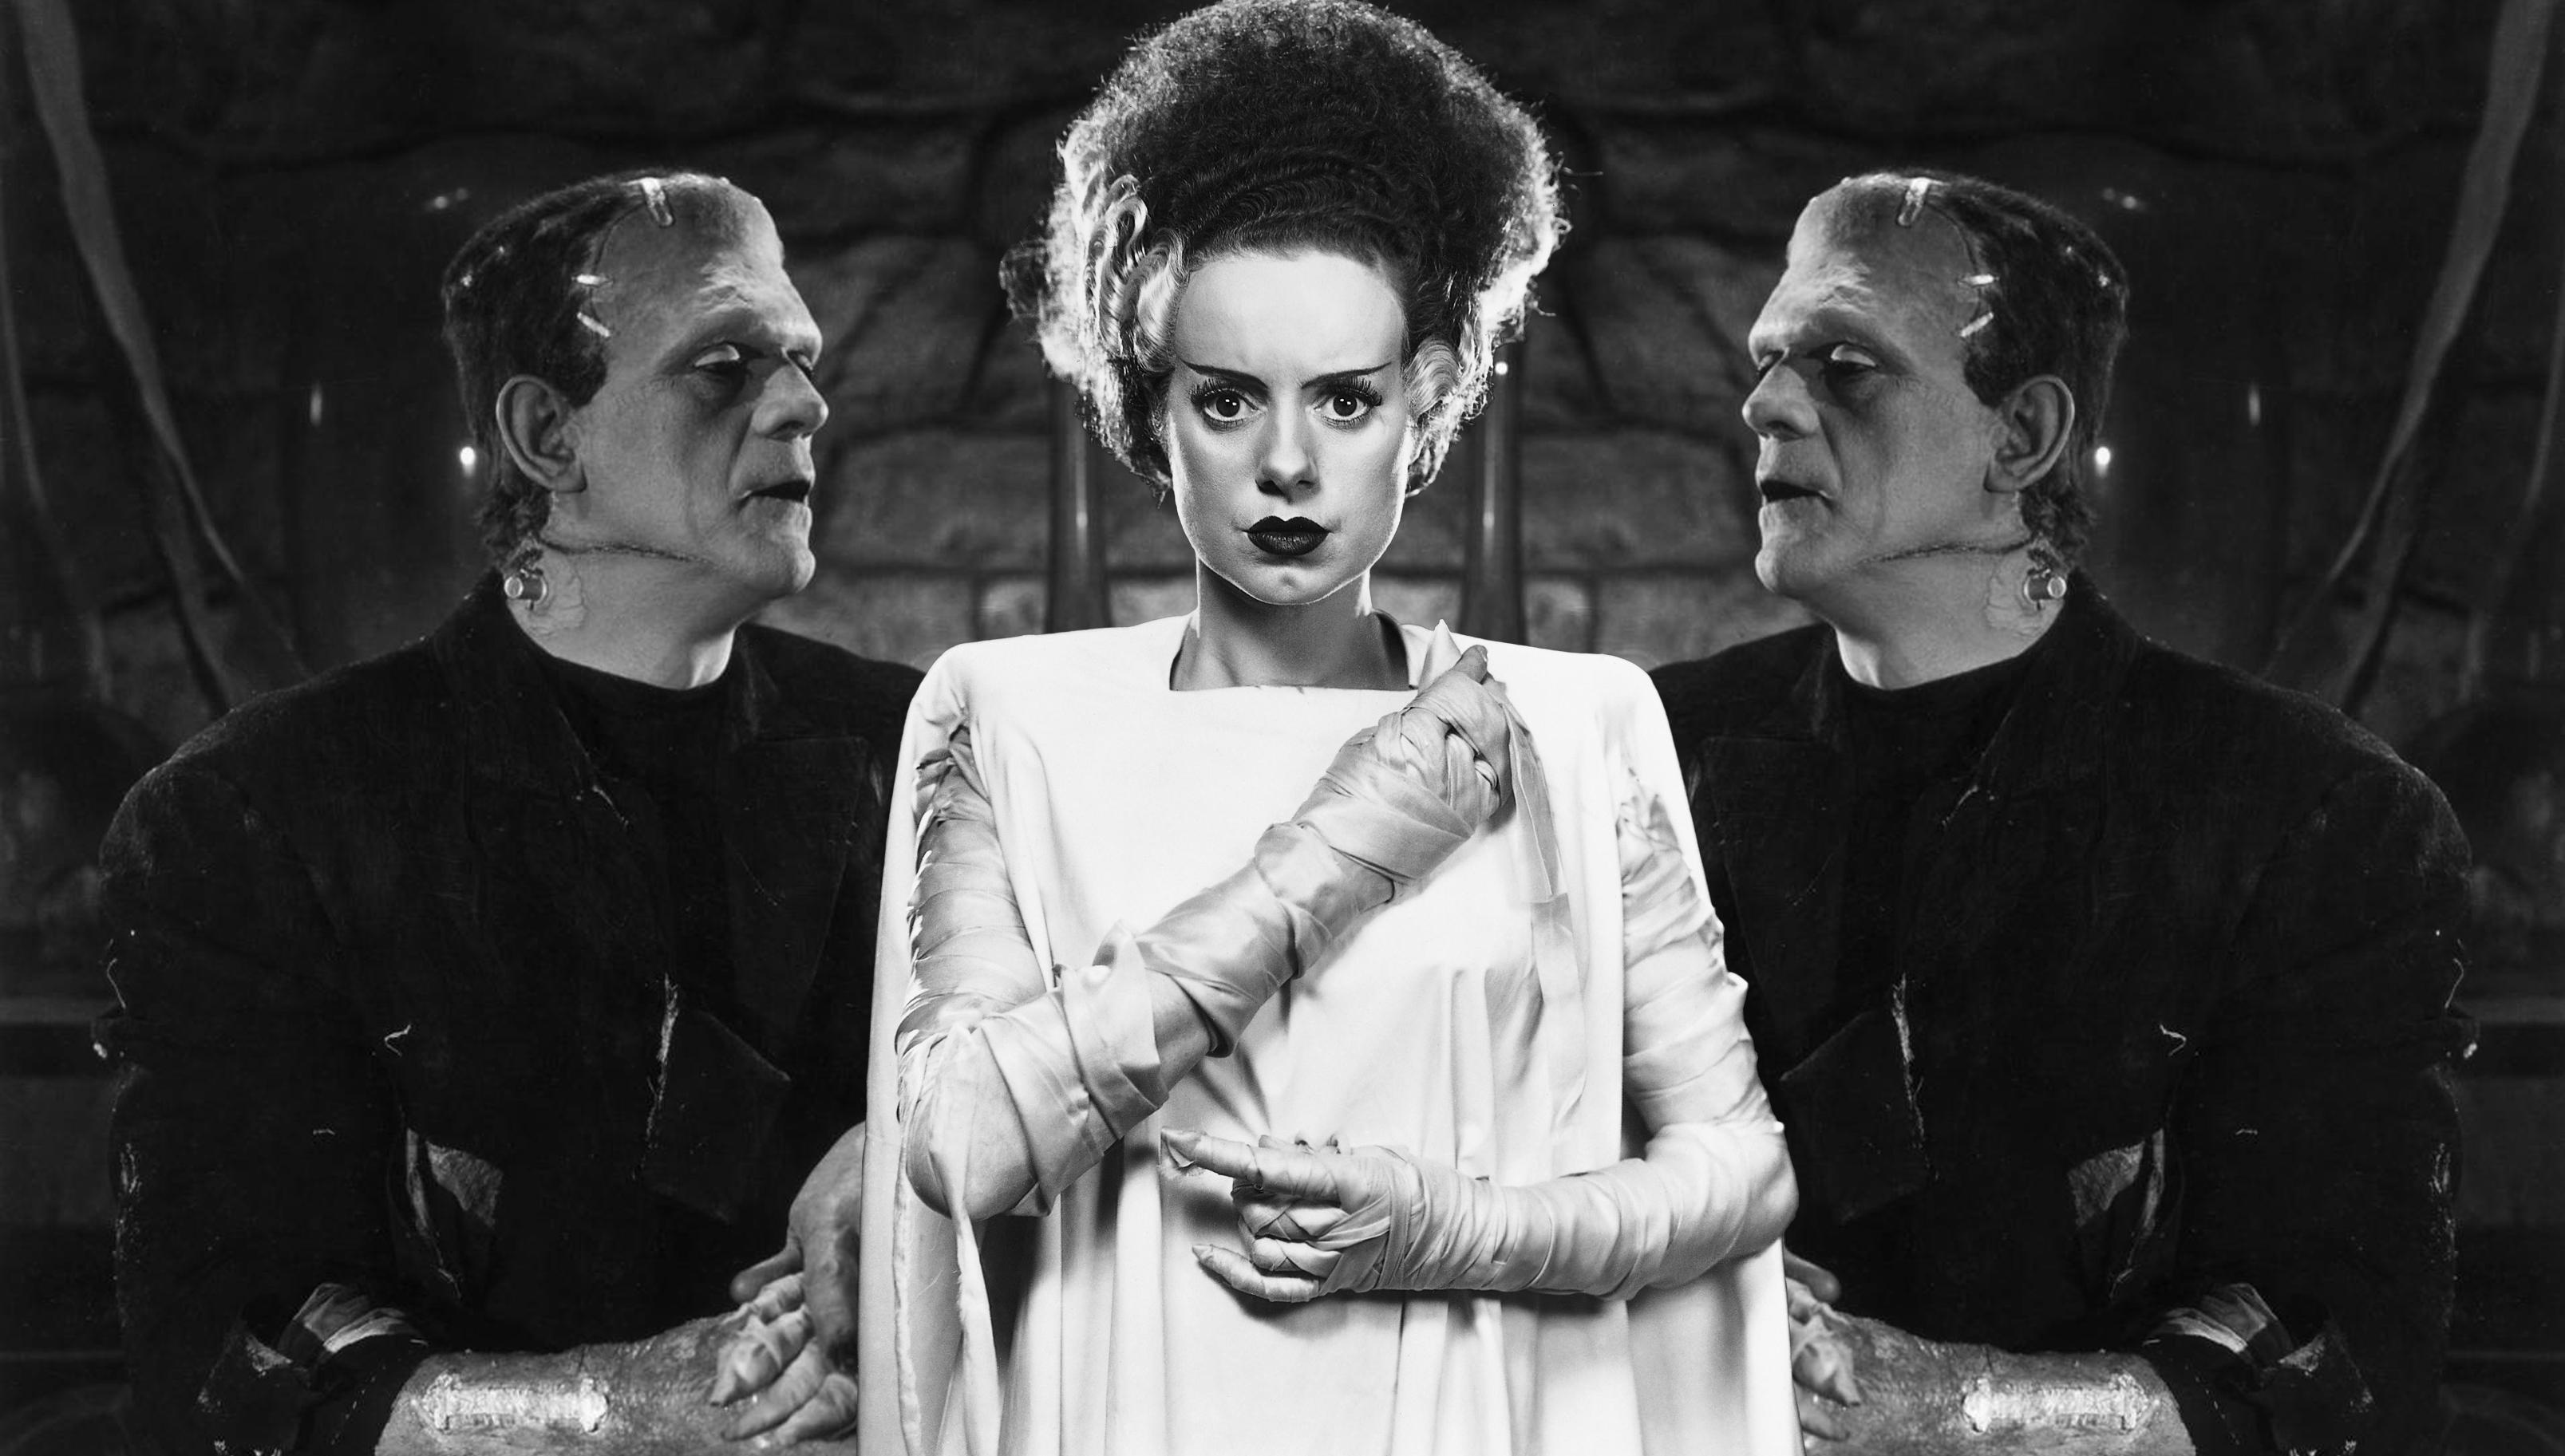 The Bride of Frankenstein Wallpaper and Background Image